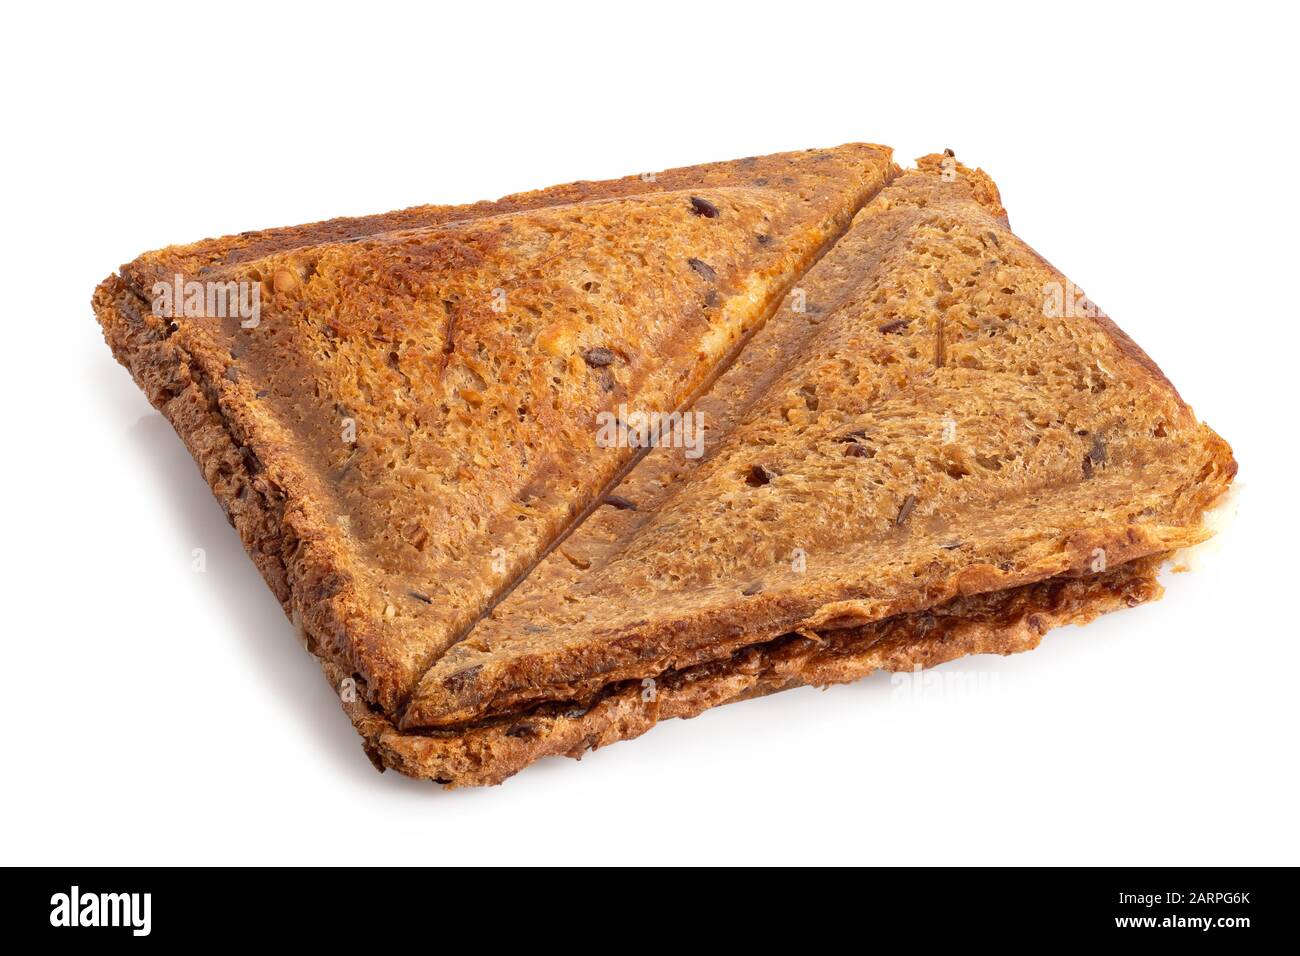 https://c8.alamy.com/comp/2ARPG6K/whole-wheat-toasted-cheese-sandwich-from-sandwich-toaster-isolated-on-white-2ARPG6K.jpg